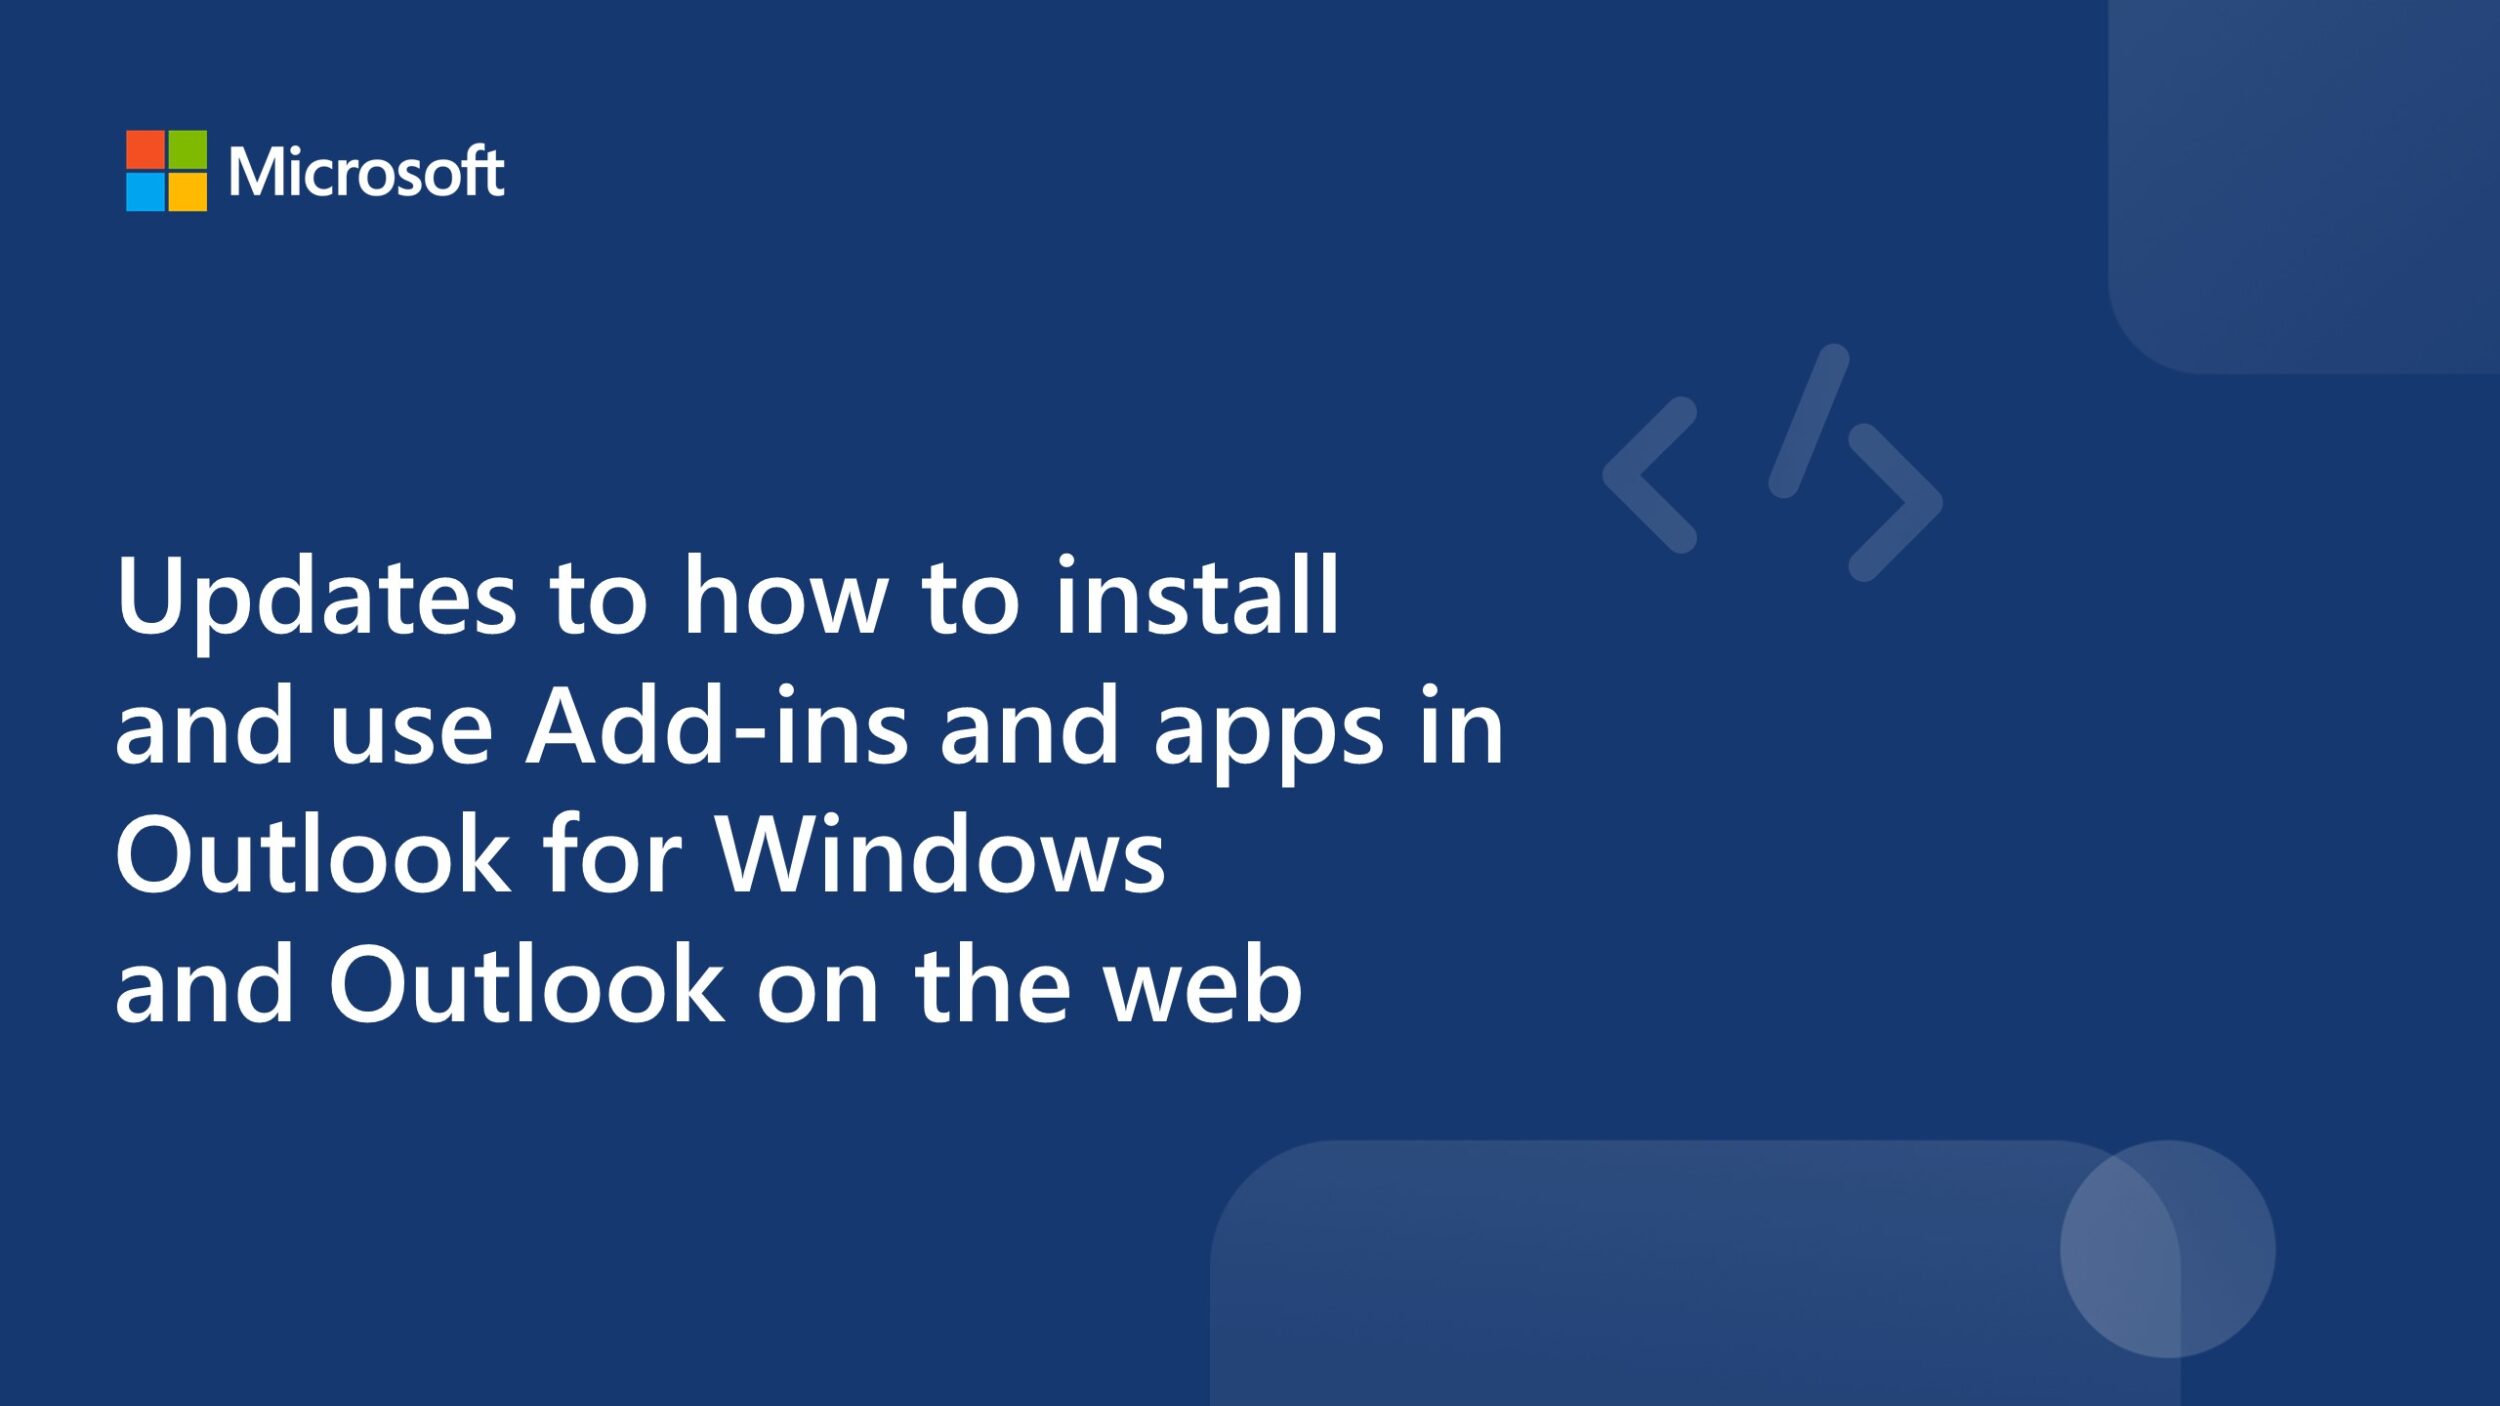 Updates to how to install and use Add-ins and apps in Outlook for Windows and Outlook on the web